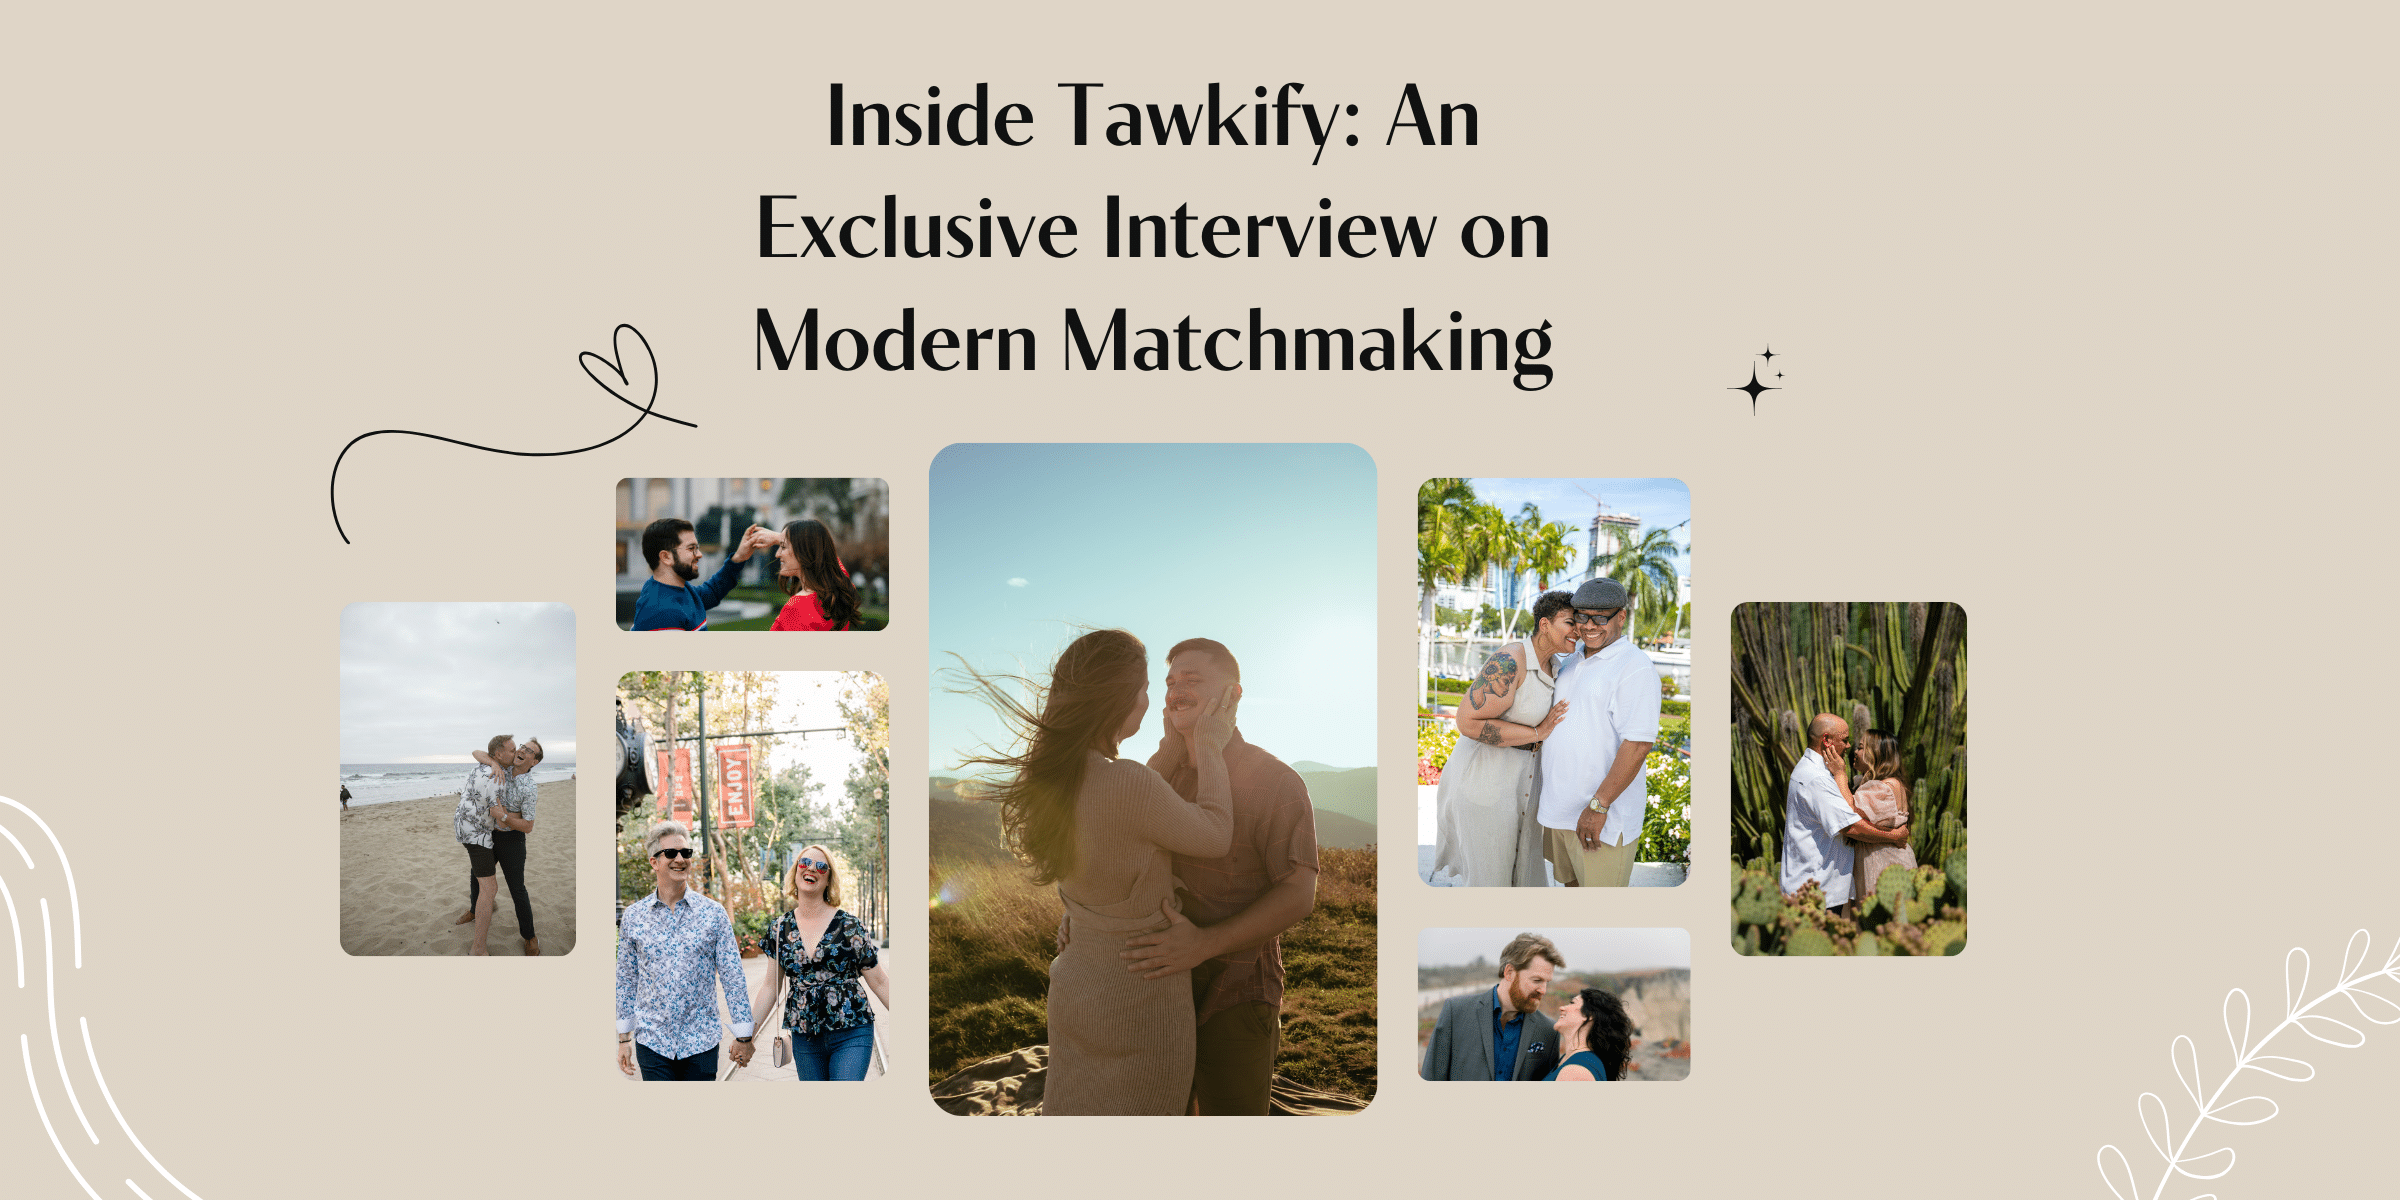 Tired of swiping, endless messaging, and dating fatigue? Learn from the Tawkify CEO how matchmaking services can bring you relationship success.